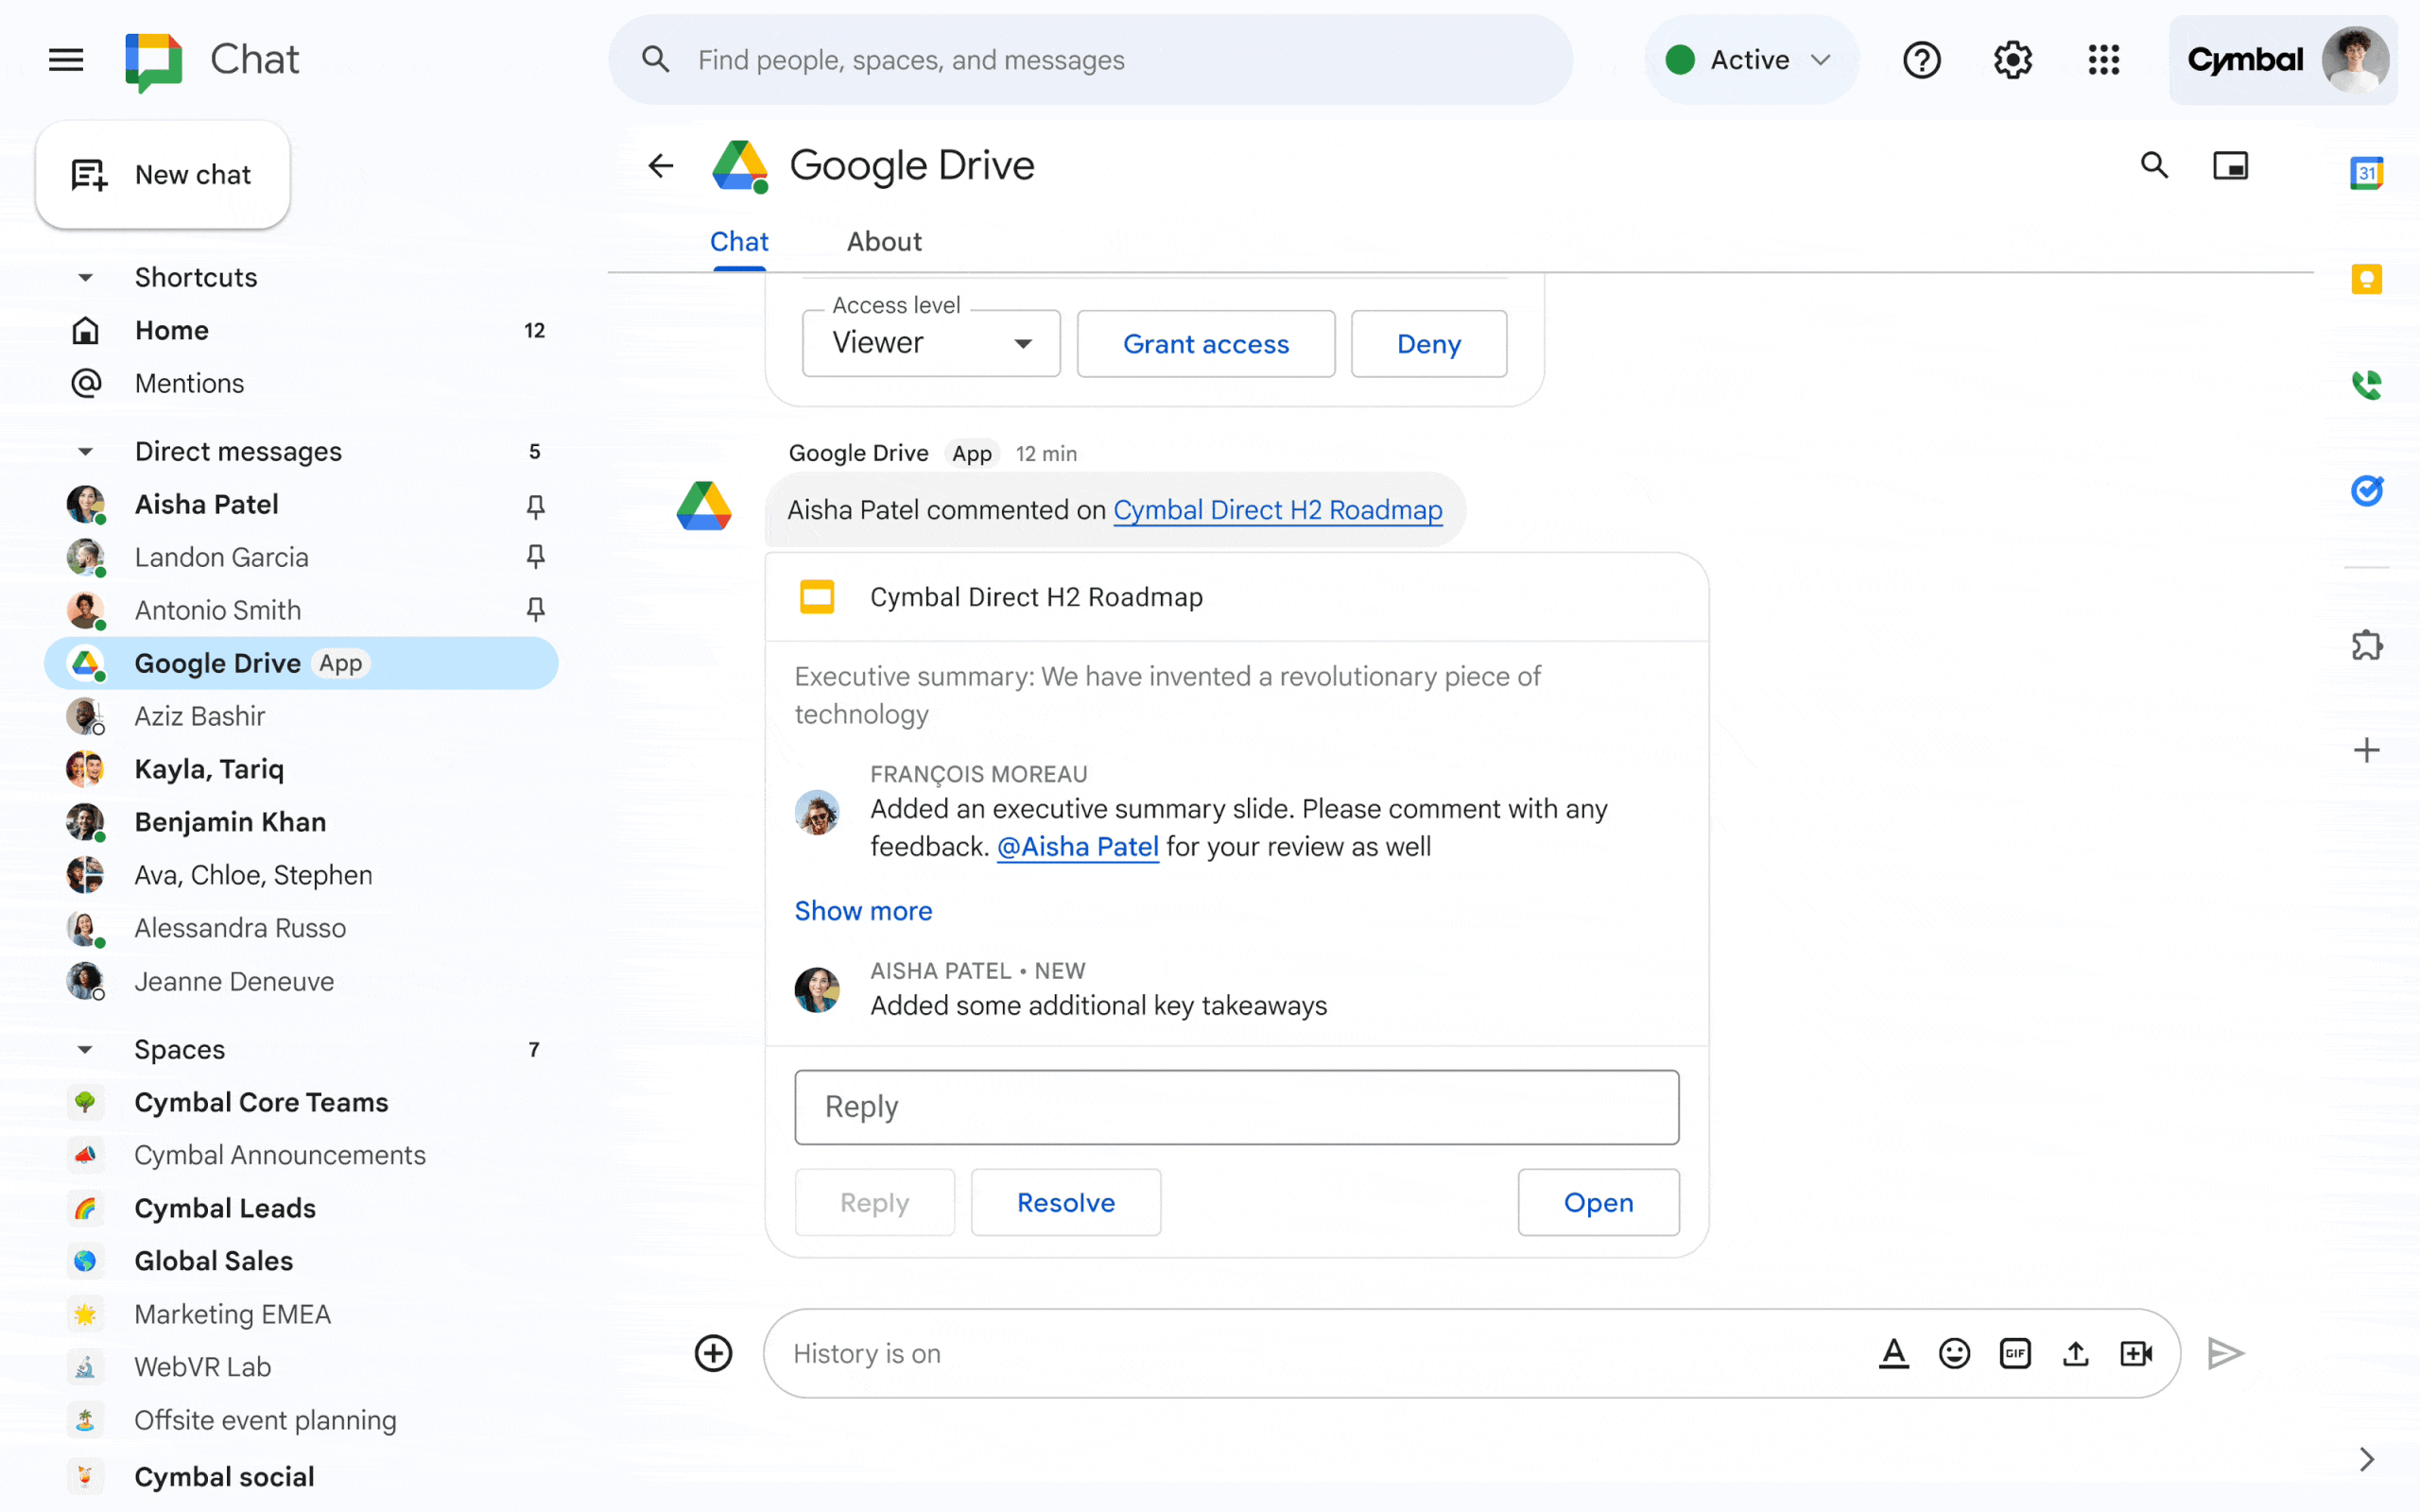 Google Drive app in Chat - interactive working